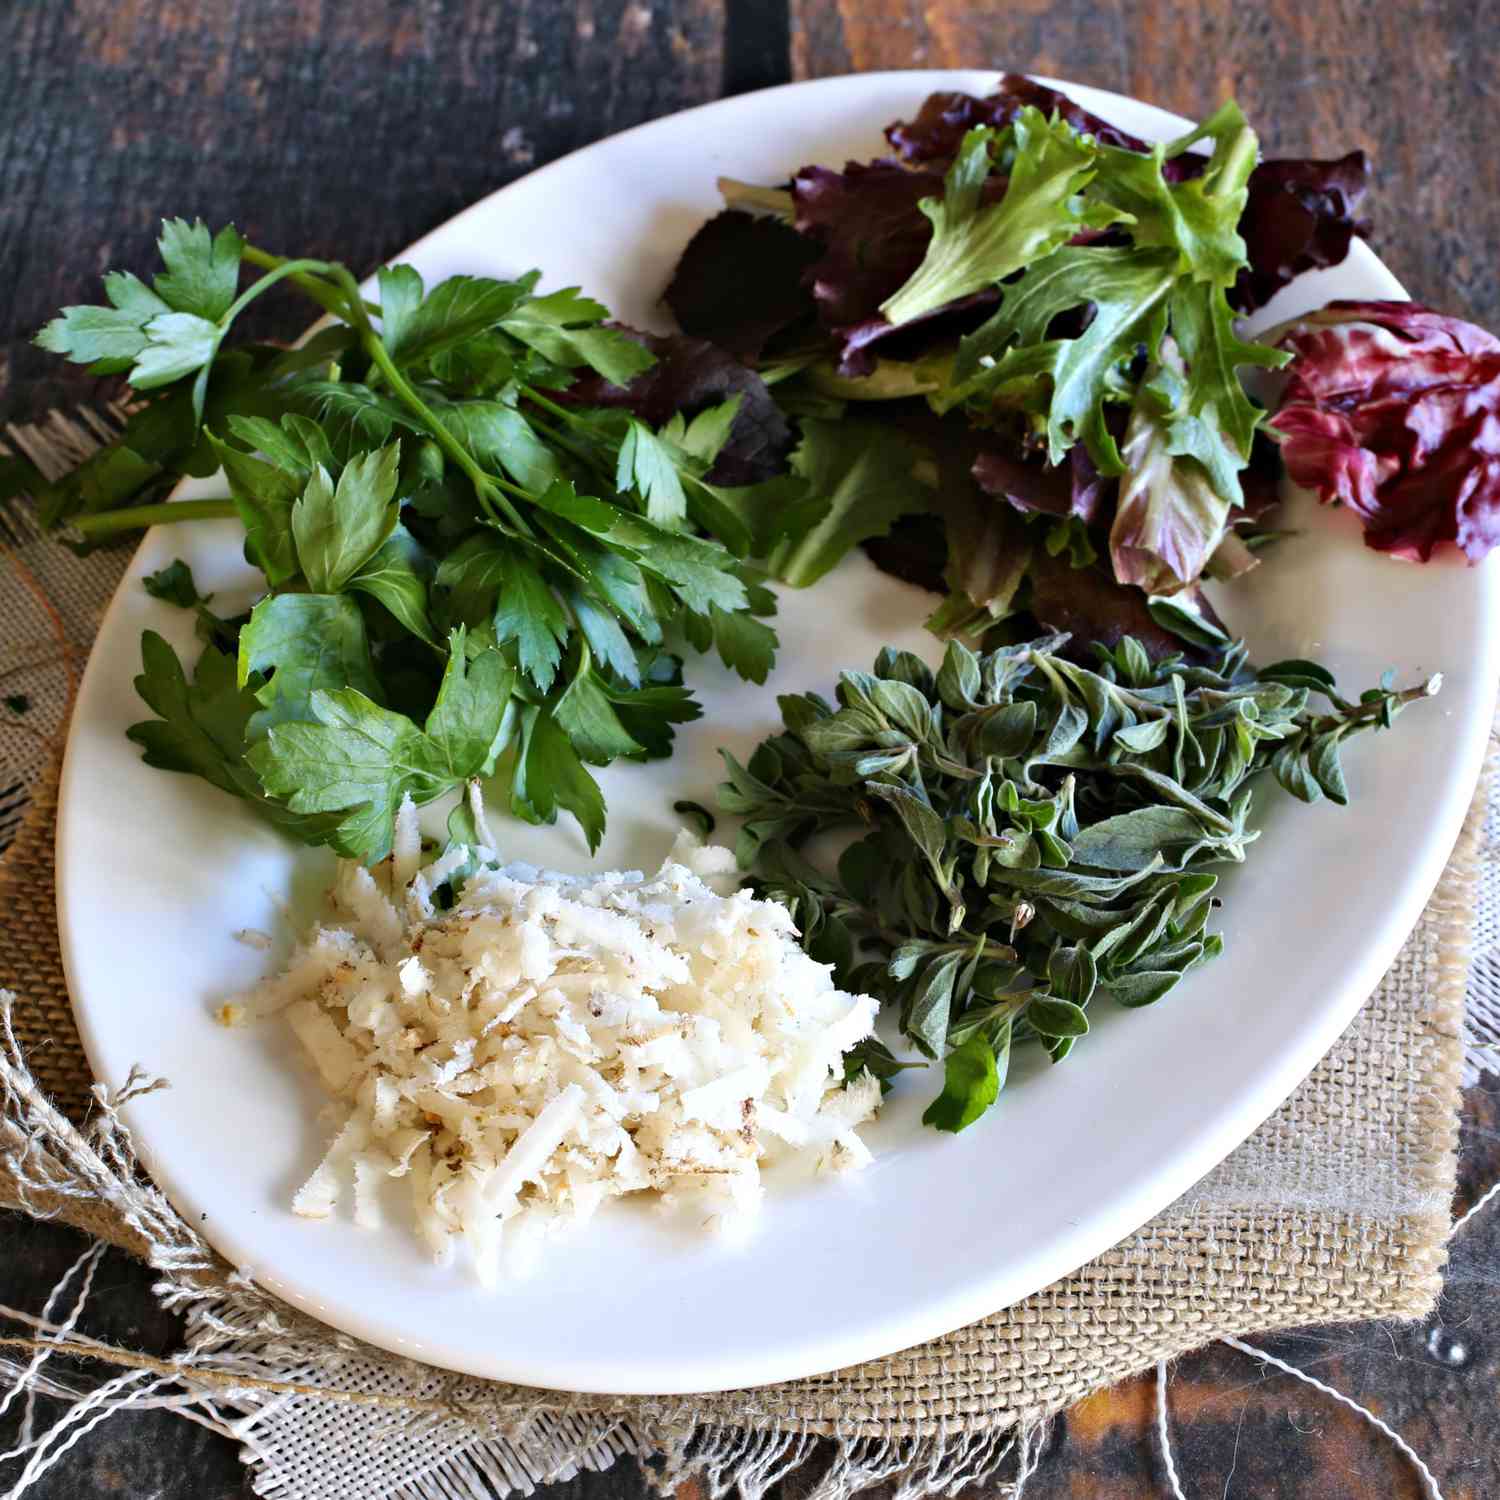 What Bitter Herbs Are Used At Passover